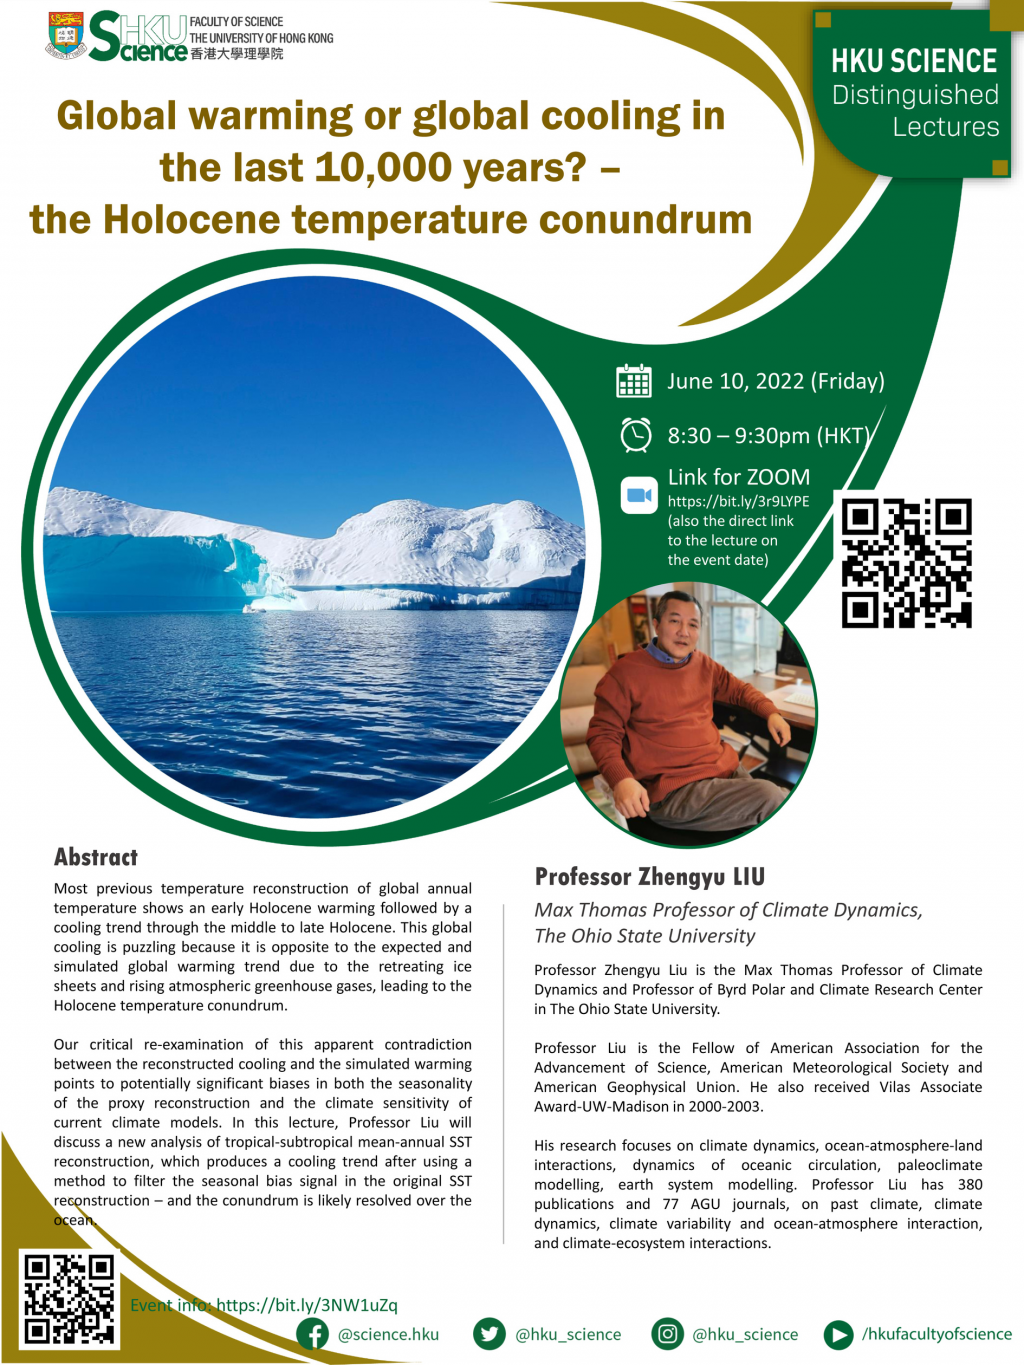 HKU Science Distinguished Lecture (June 10) on Holocene temperature conundrum by Prof. Zhengyu Liu